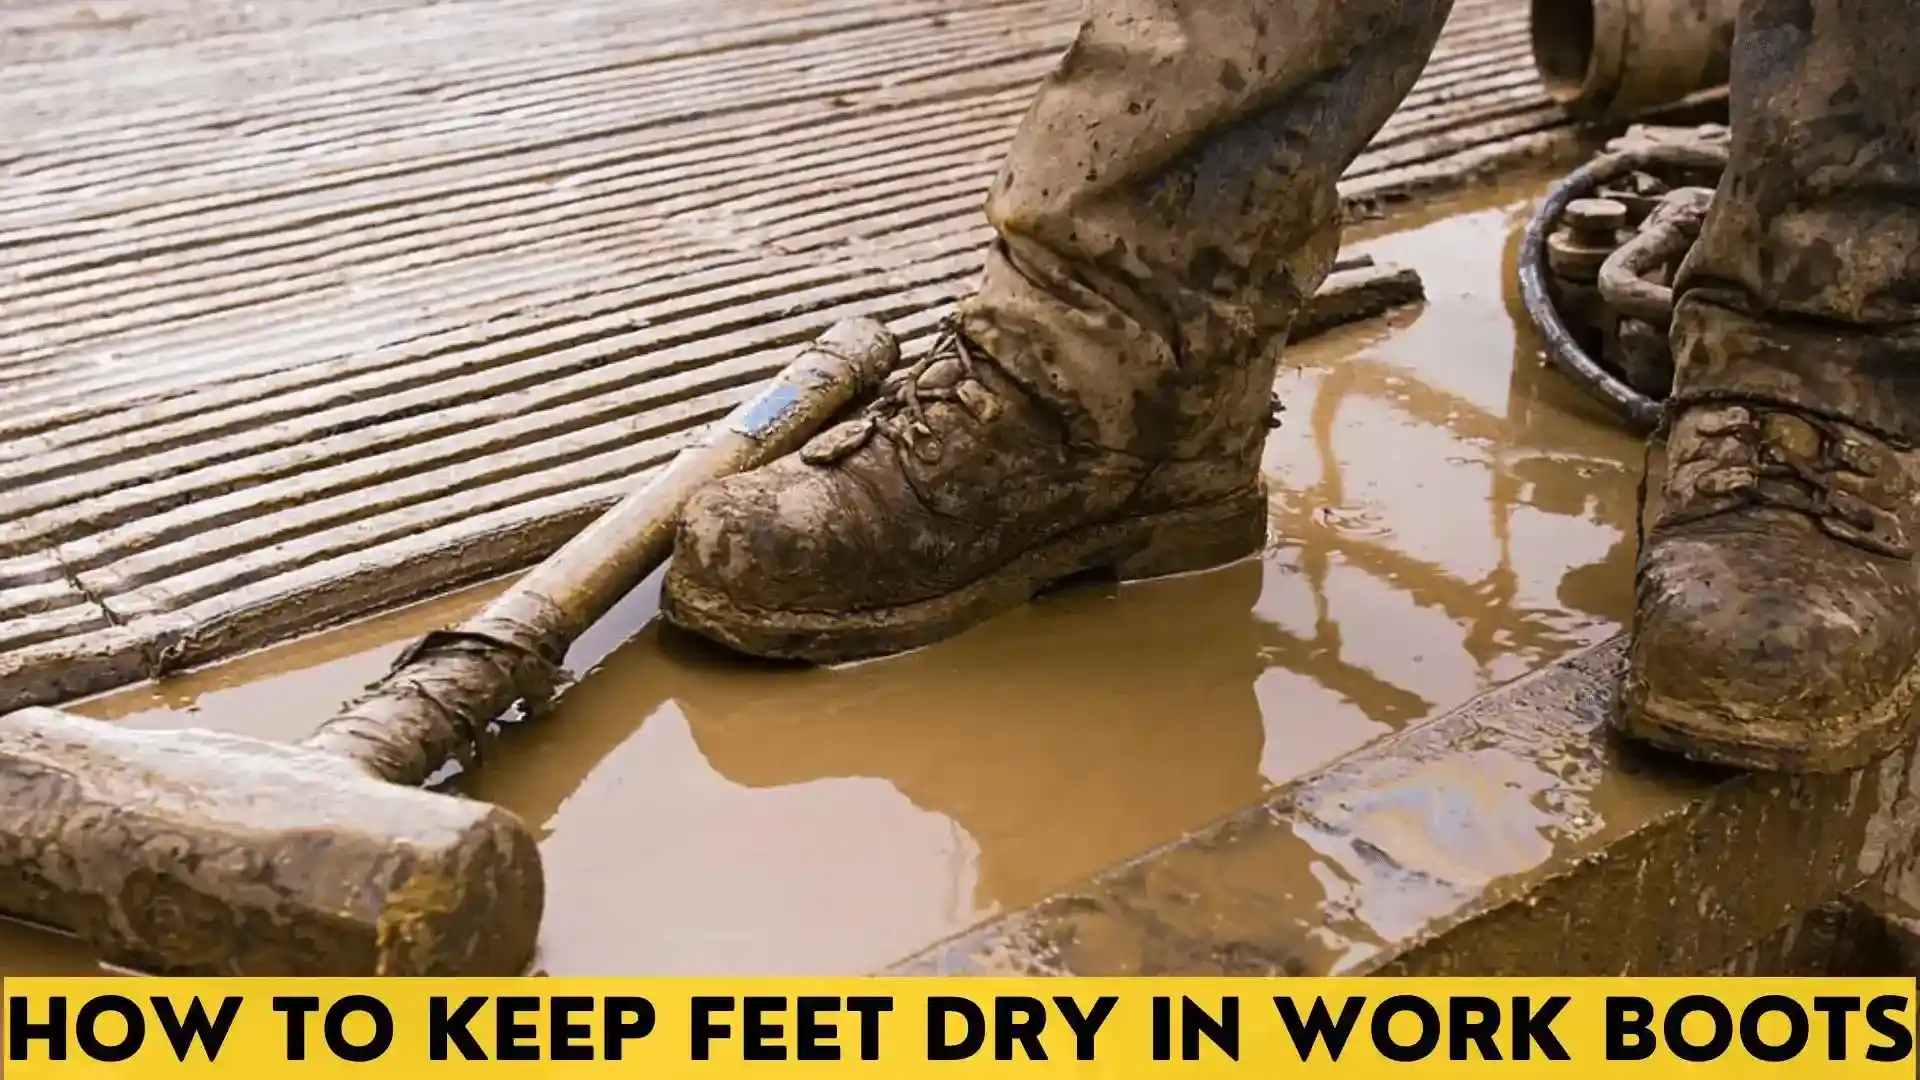 How To Keep Feet Dry in Work Boots